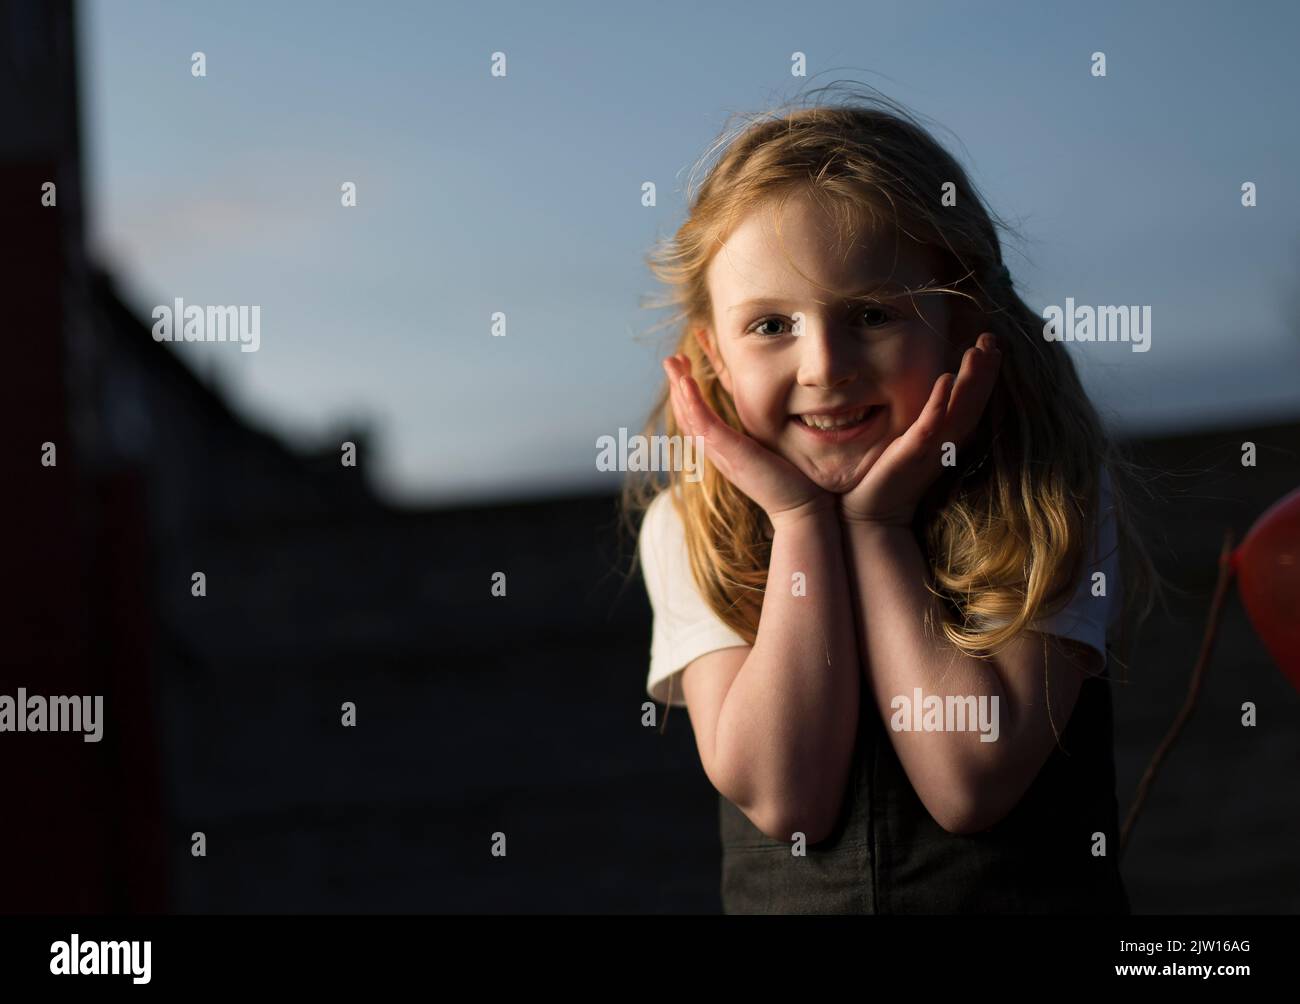 Caucasian young girl poses with hands outside in school uniform. Stock Photo